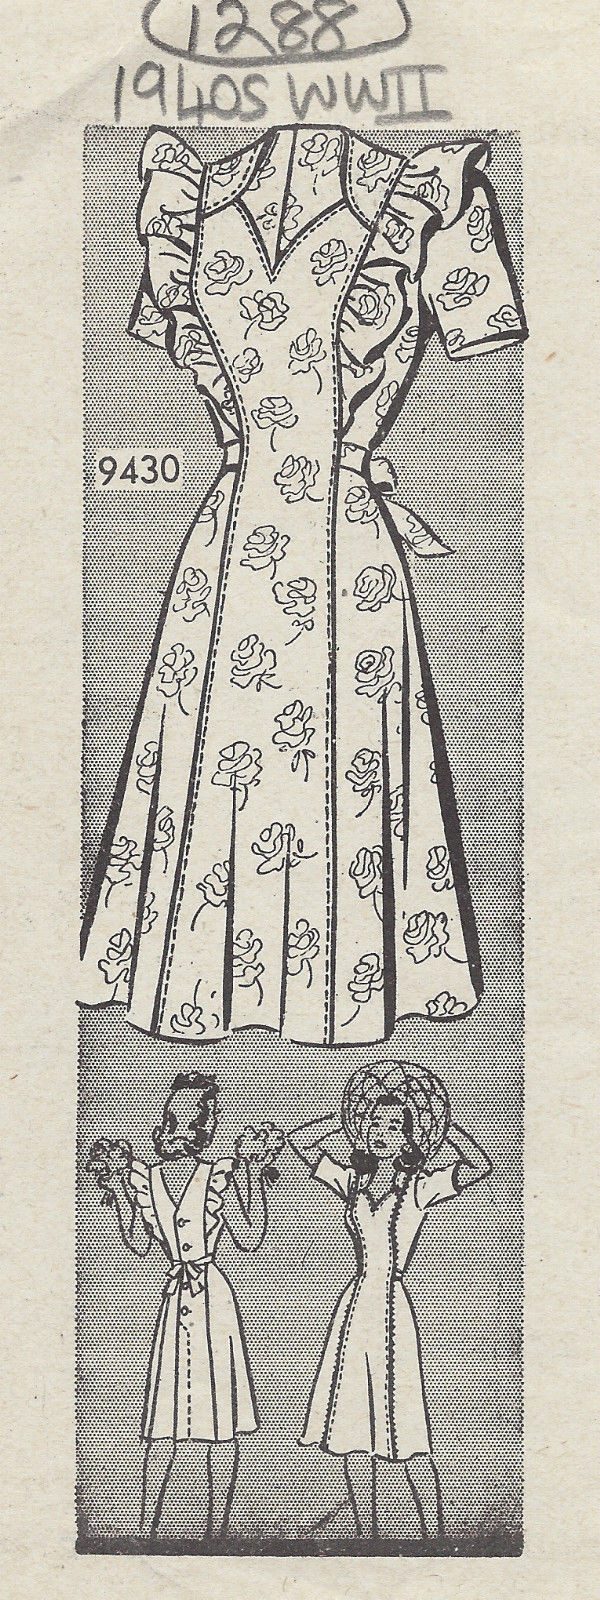 1940s-Vintage-Sewing-Pattern-DRESS-PINAFORE-B34-1288-By-Marian-Martin-251563953074